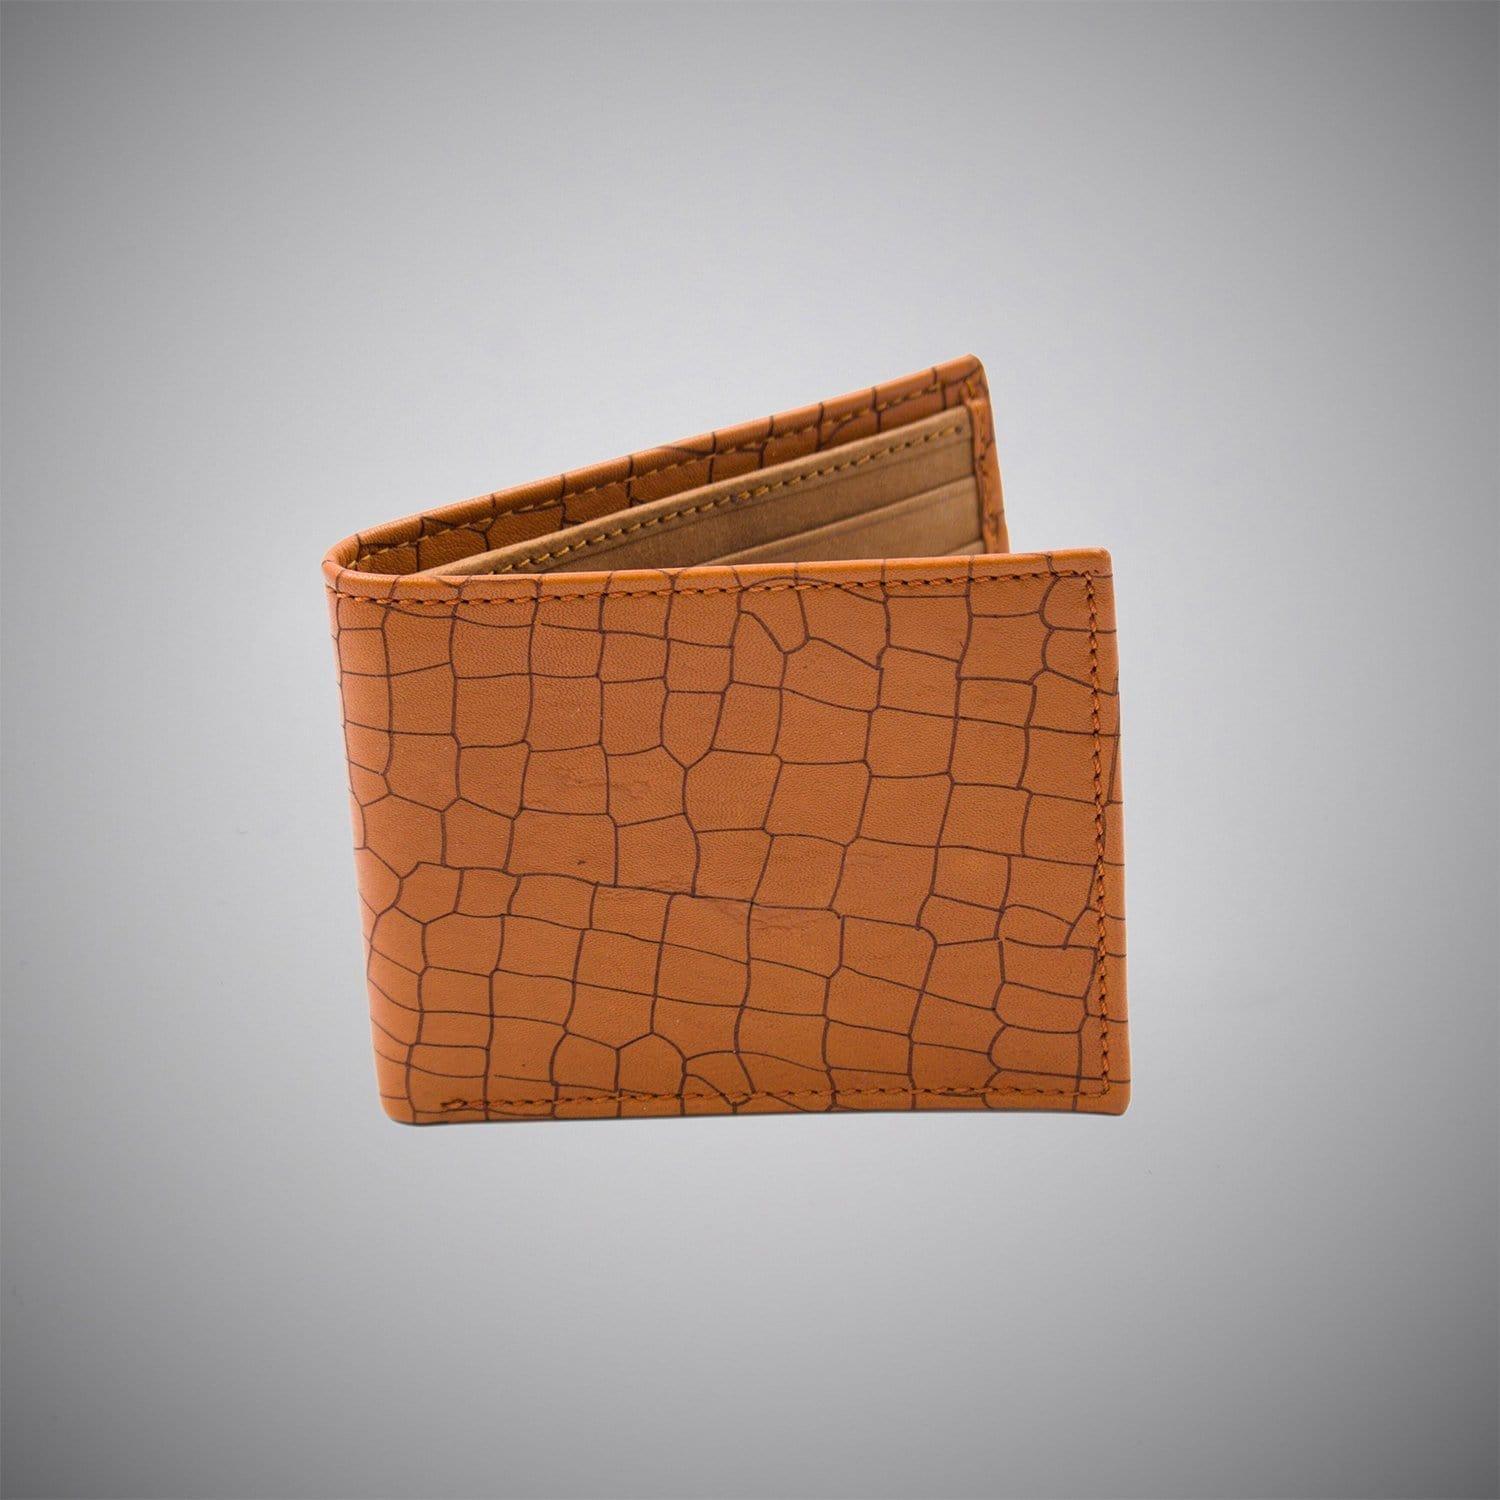 Cognac Embossed Calf Leather Wallet With Tan Suede Interior - Just White Shirts